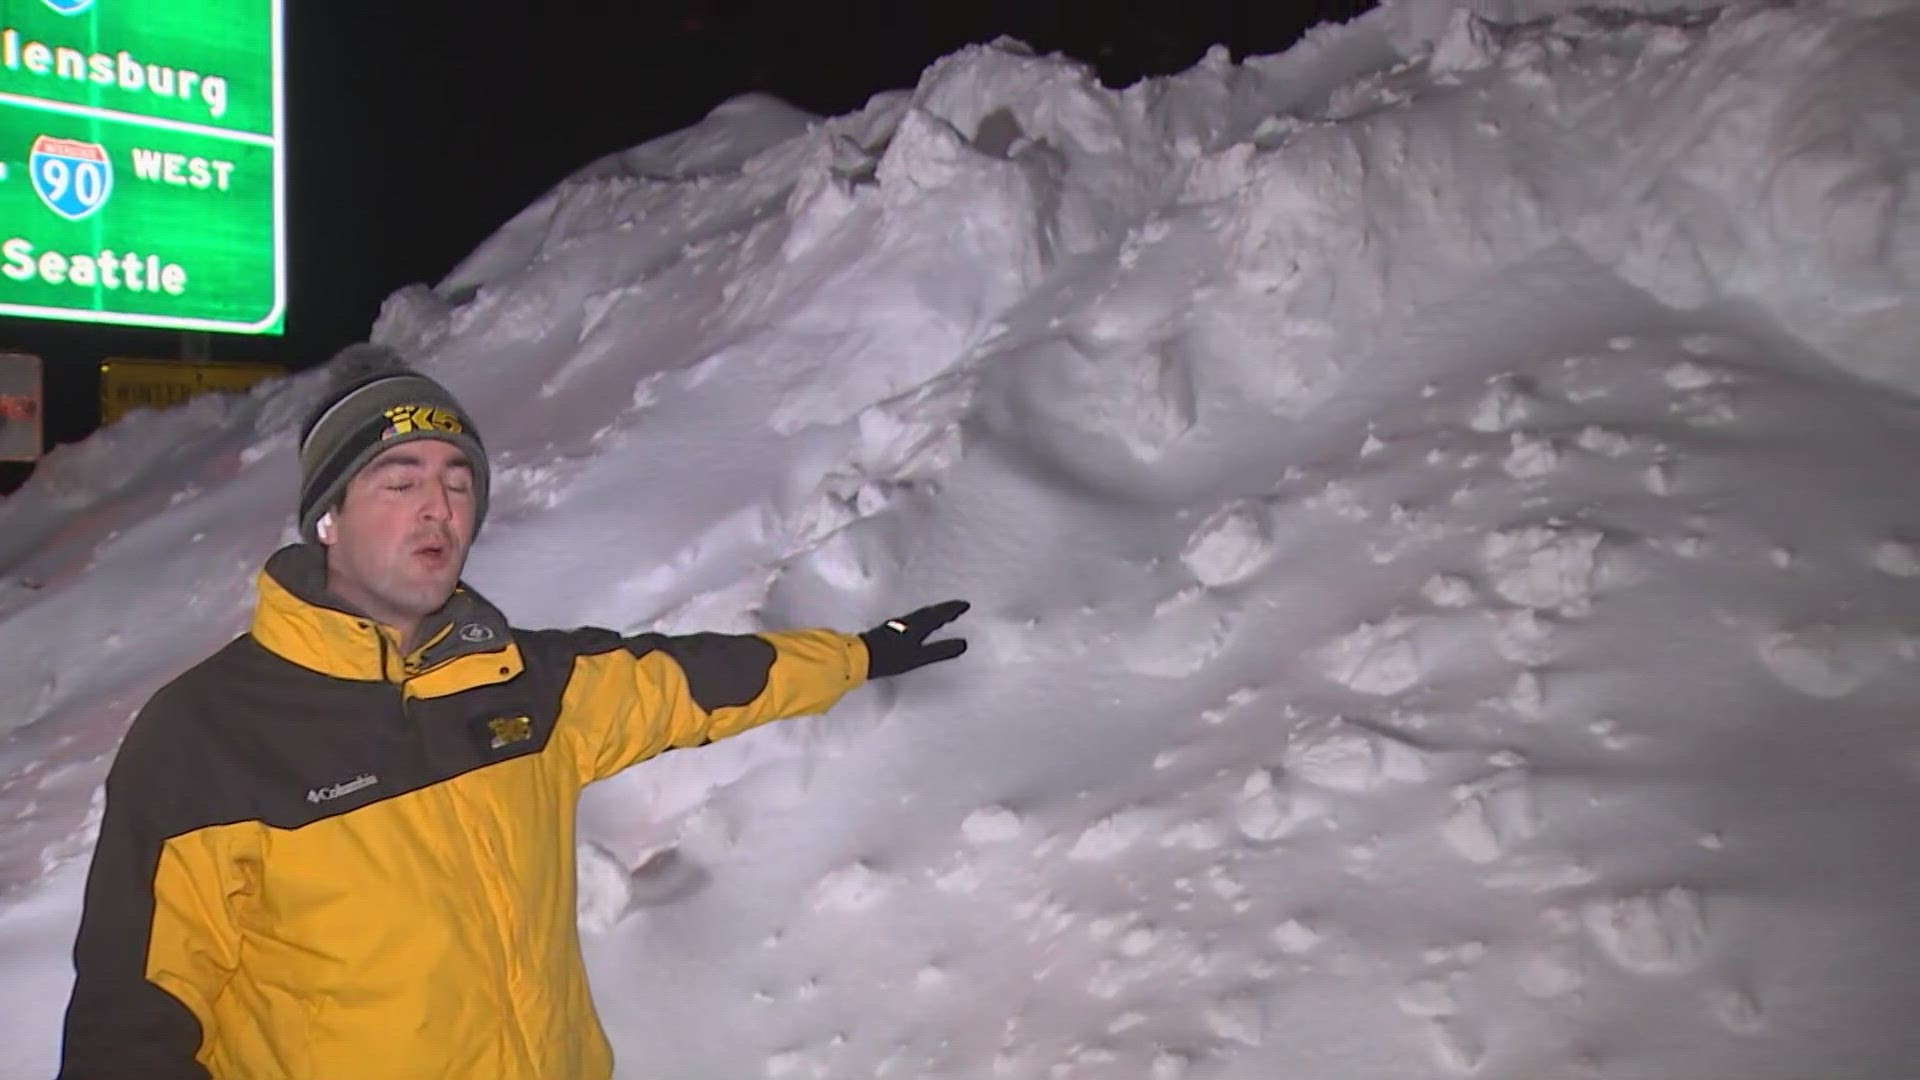 A week of snow dumping on the Cascades plus slightly warming temperatures have crews shutting down Snoqualmie Pass to execute avalanche control measures